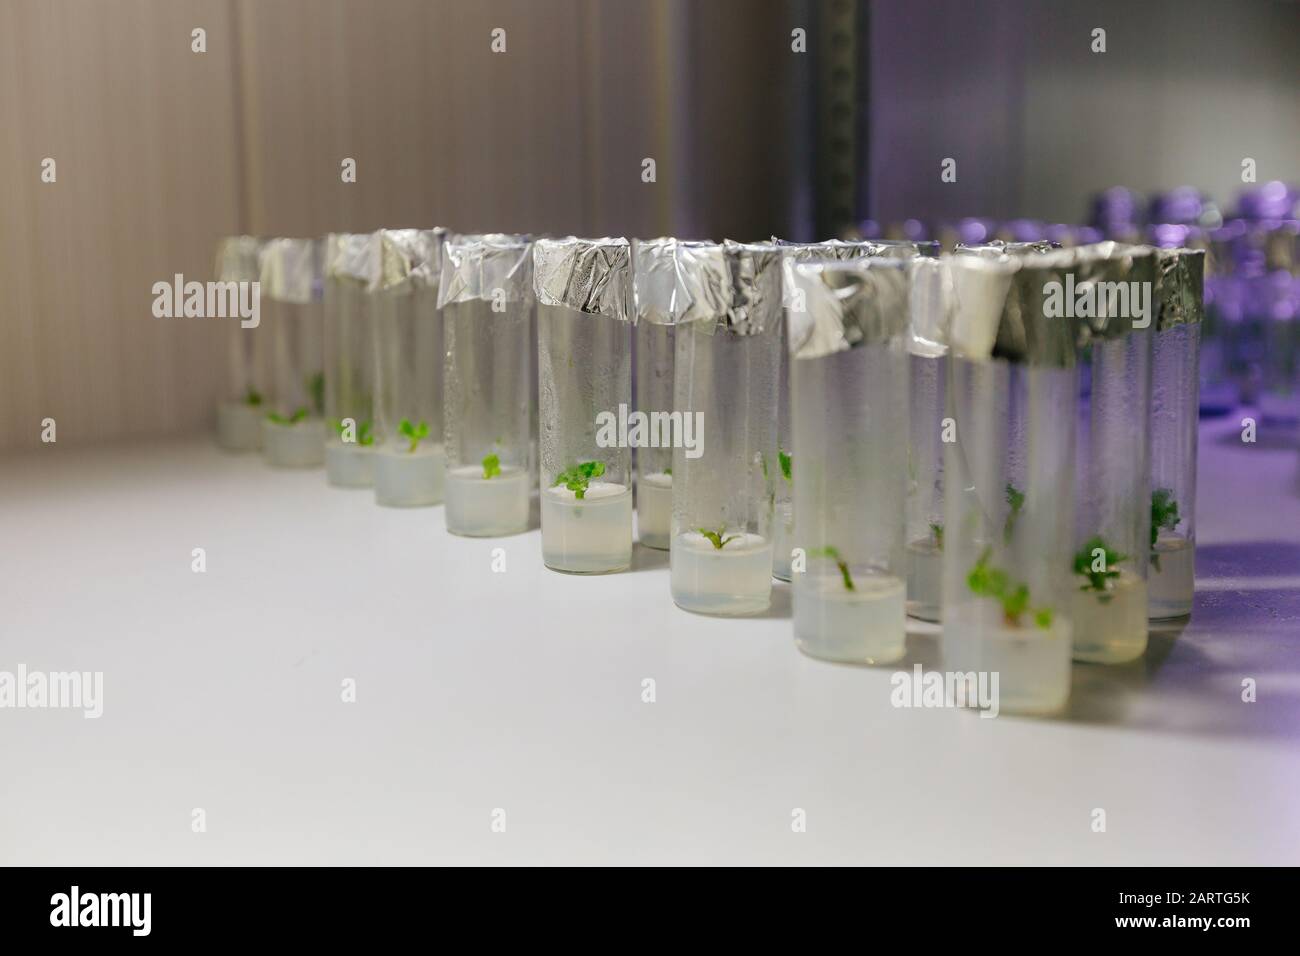 Cloned micro plants in test tubes with nutrient medium. Micropropagation technology in vitro. Stock Photo